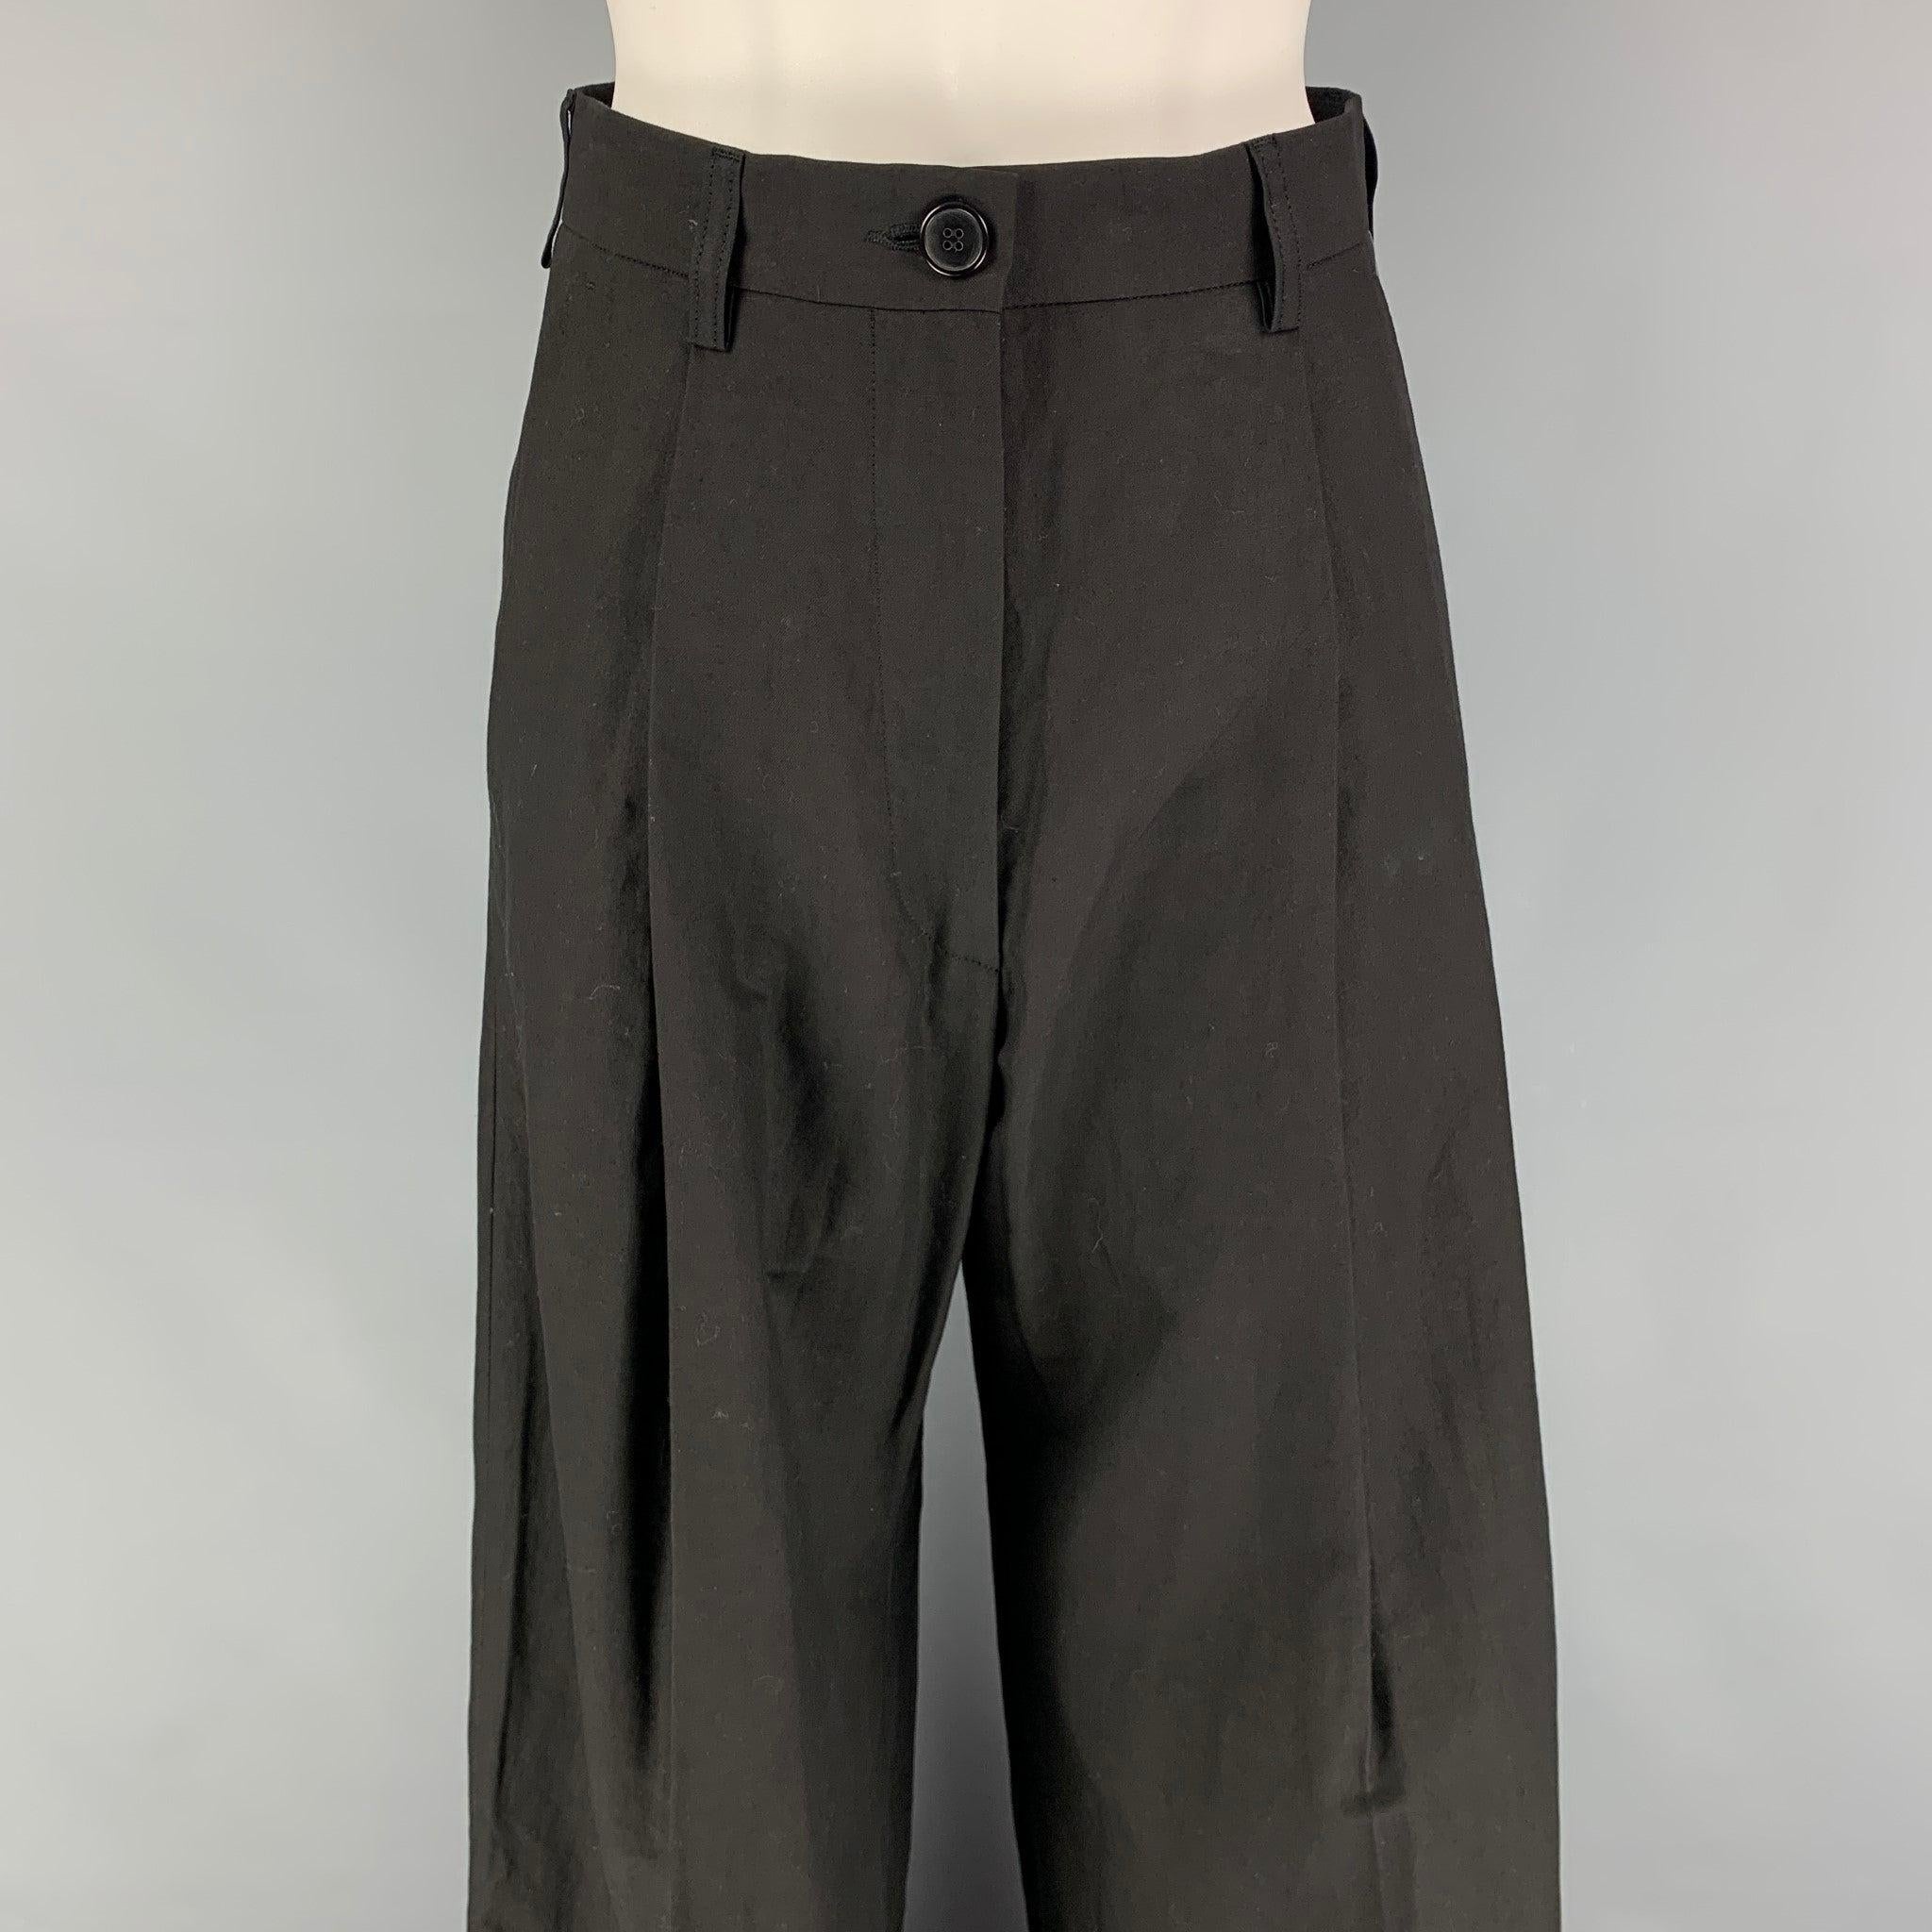 DRIES VAN NOTEN dress pants comes in a black cotton / linen featuring a wide leg style, pleated, cuffed, and a zip fly closure. Made in Romania.
Very Good
Pre-Owned Condition. 

Marked:   34 

Measurements: 
  Waist: 27 inches  Rise: 12.5 inches 